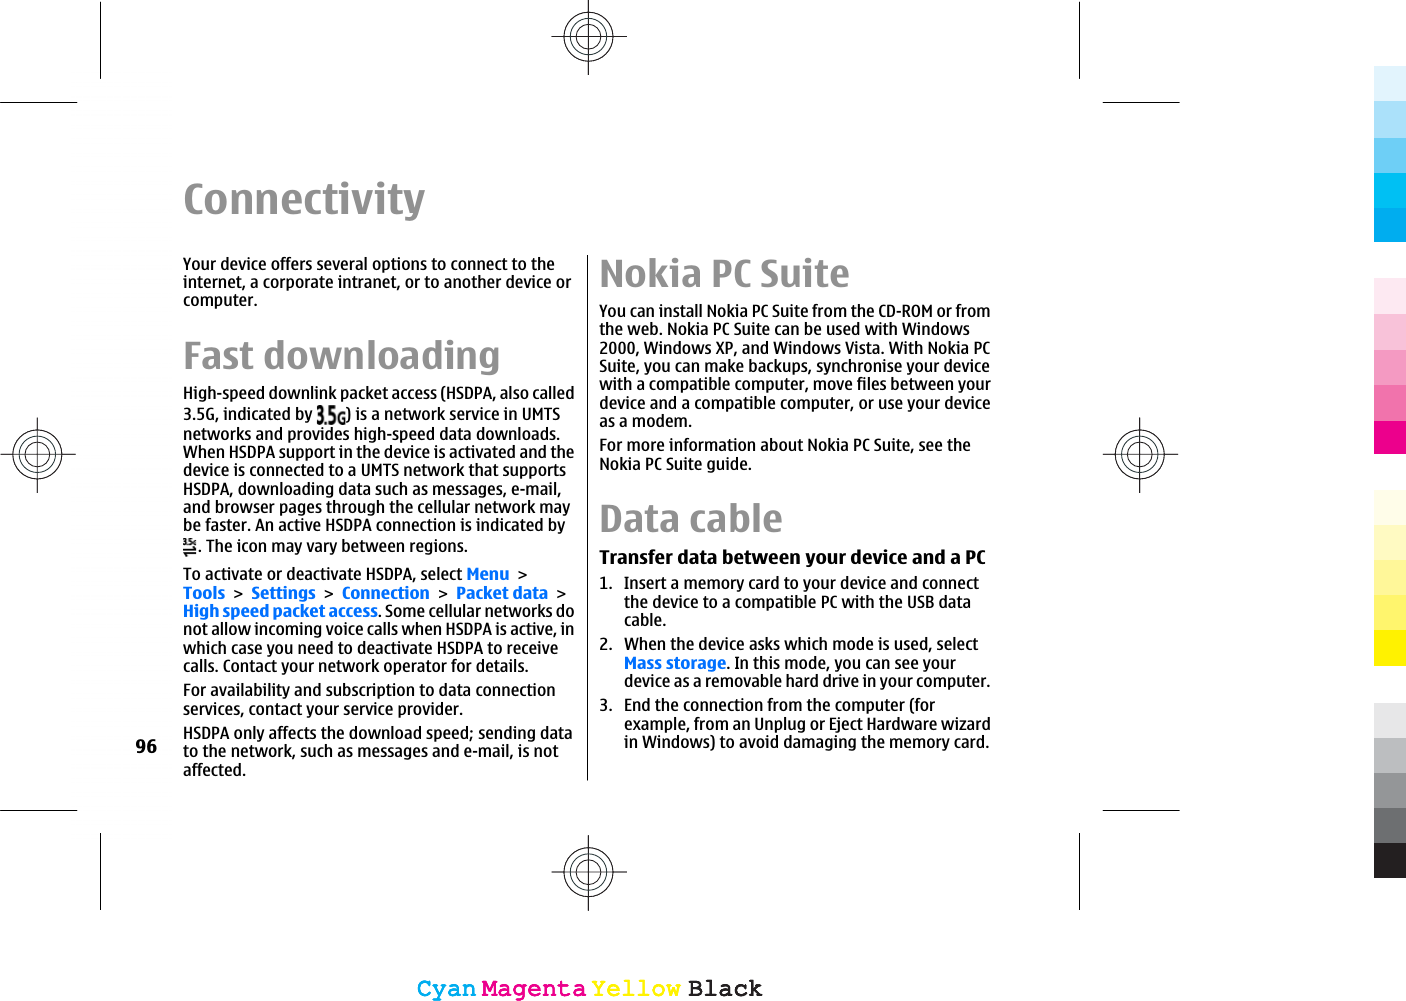 ConnectivityYour device offers several options to connect to theinternet, a corporate intranet, or to another device orcomputer.Fast downloadingHigh-speed downlink packet access (HSDPA, also called3.5G, indicated by  ) is a network service in UMTSnetworks and provides high-speed data downloads.When HSDPA support in the device is activated and thedevice is connected to a UMTS network that supportsHSDPA, downloading data such as messages, e-mail,and browser pages through the cellular network maybe faster. An active HSDPA connection is indicated by. The icon may vary between regions.To activate or deactivate HSDPA, select MenuToolsSettingsConnectionPacket dataHigh speed packet access. Some cellular networks donot allow incoming voice calls when HSDPA is active, inwhich case you need to deactivate HSDPA to receivecalls. Contact your network operator for details.For availability and subscription to data connectionservices, contact your service provider.HSDPA only affects the download speed; sending datato the network, such as messages and e-mail, is notaffected.Nokia PC SuiteYou can install Nokia PC Suite from the CD-ROM or fromthe web. Nokia PC Suite can be used with Windows2000, Windows XP, and Windows Vista. With Nokia PCSuite, you can make backups, synchronise your devicewith a compatible computer, move files between yourdevice and a compatible computer, or use your deviceas a modem.For more information about Nokia PC Suite, see theNokia PC Suite guide.Data cableTransfer data between your device and a PC1. Insert a memory card to your device and connectthe device to a compatible PC with the USB datacable.2. When the device asks which mode is used, selectMass storage. In this mode, you can see yourdevice as a removable hard drive in your computer.3. End the connection from the computer (forexample, from an Unplug or Eject Hardware wizardin Windows) to avoid damaging the memory card.96CyanCyanMagentaMagentaYellowYellowBlackBlackCyanCyanMagentaMagentaYellowYellowBlackBlack